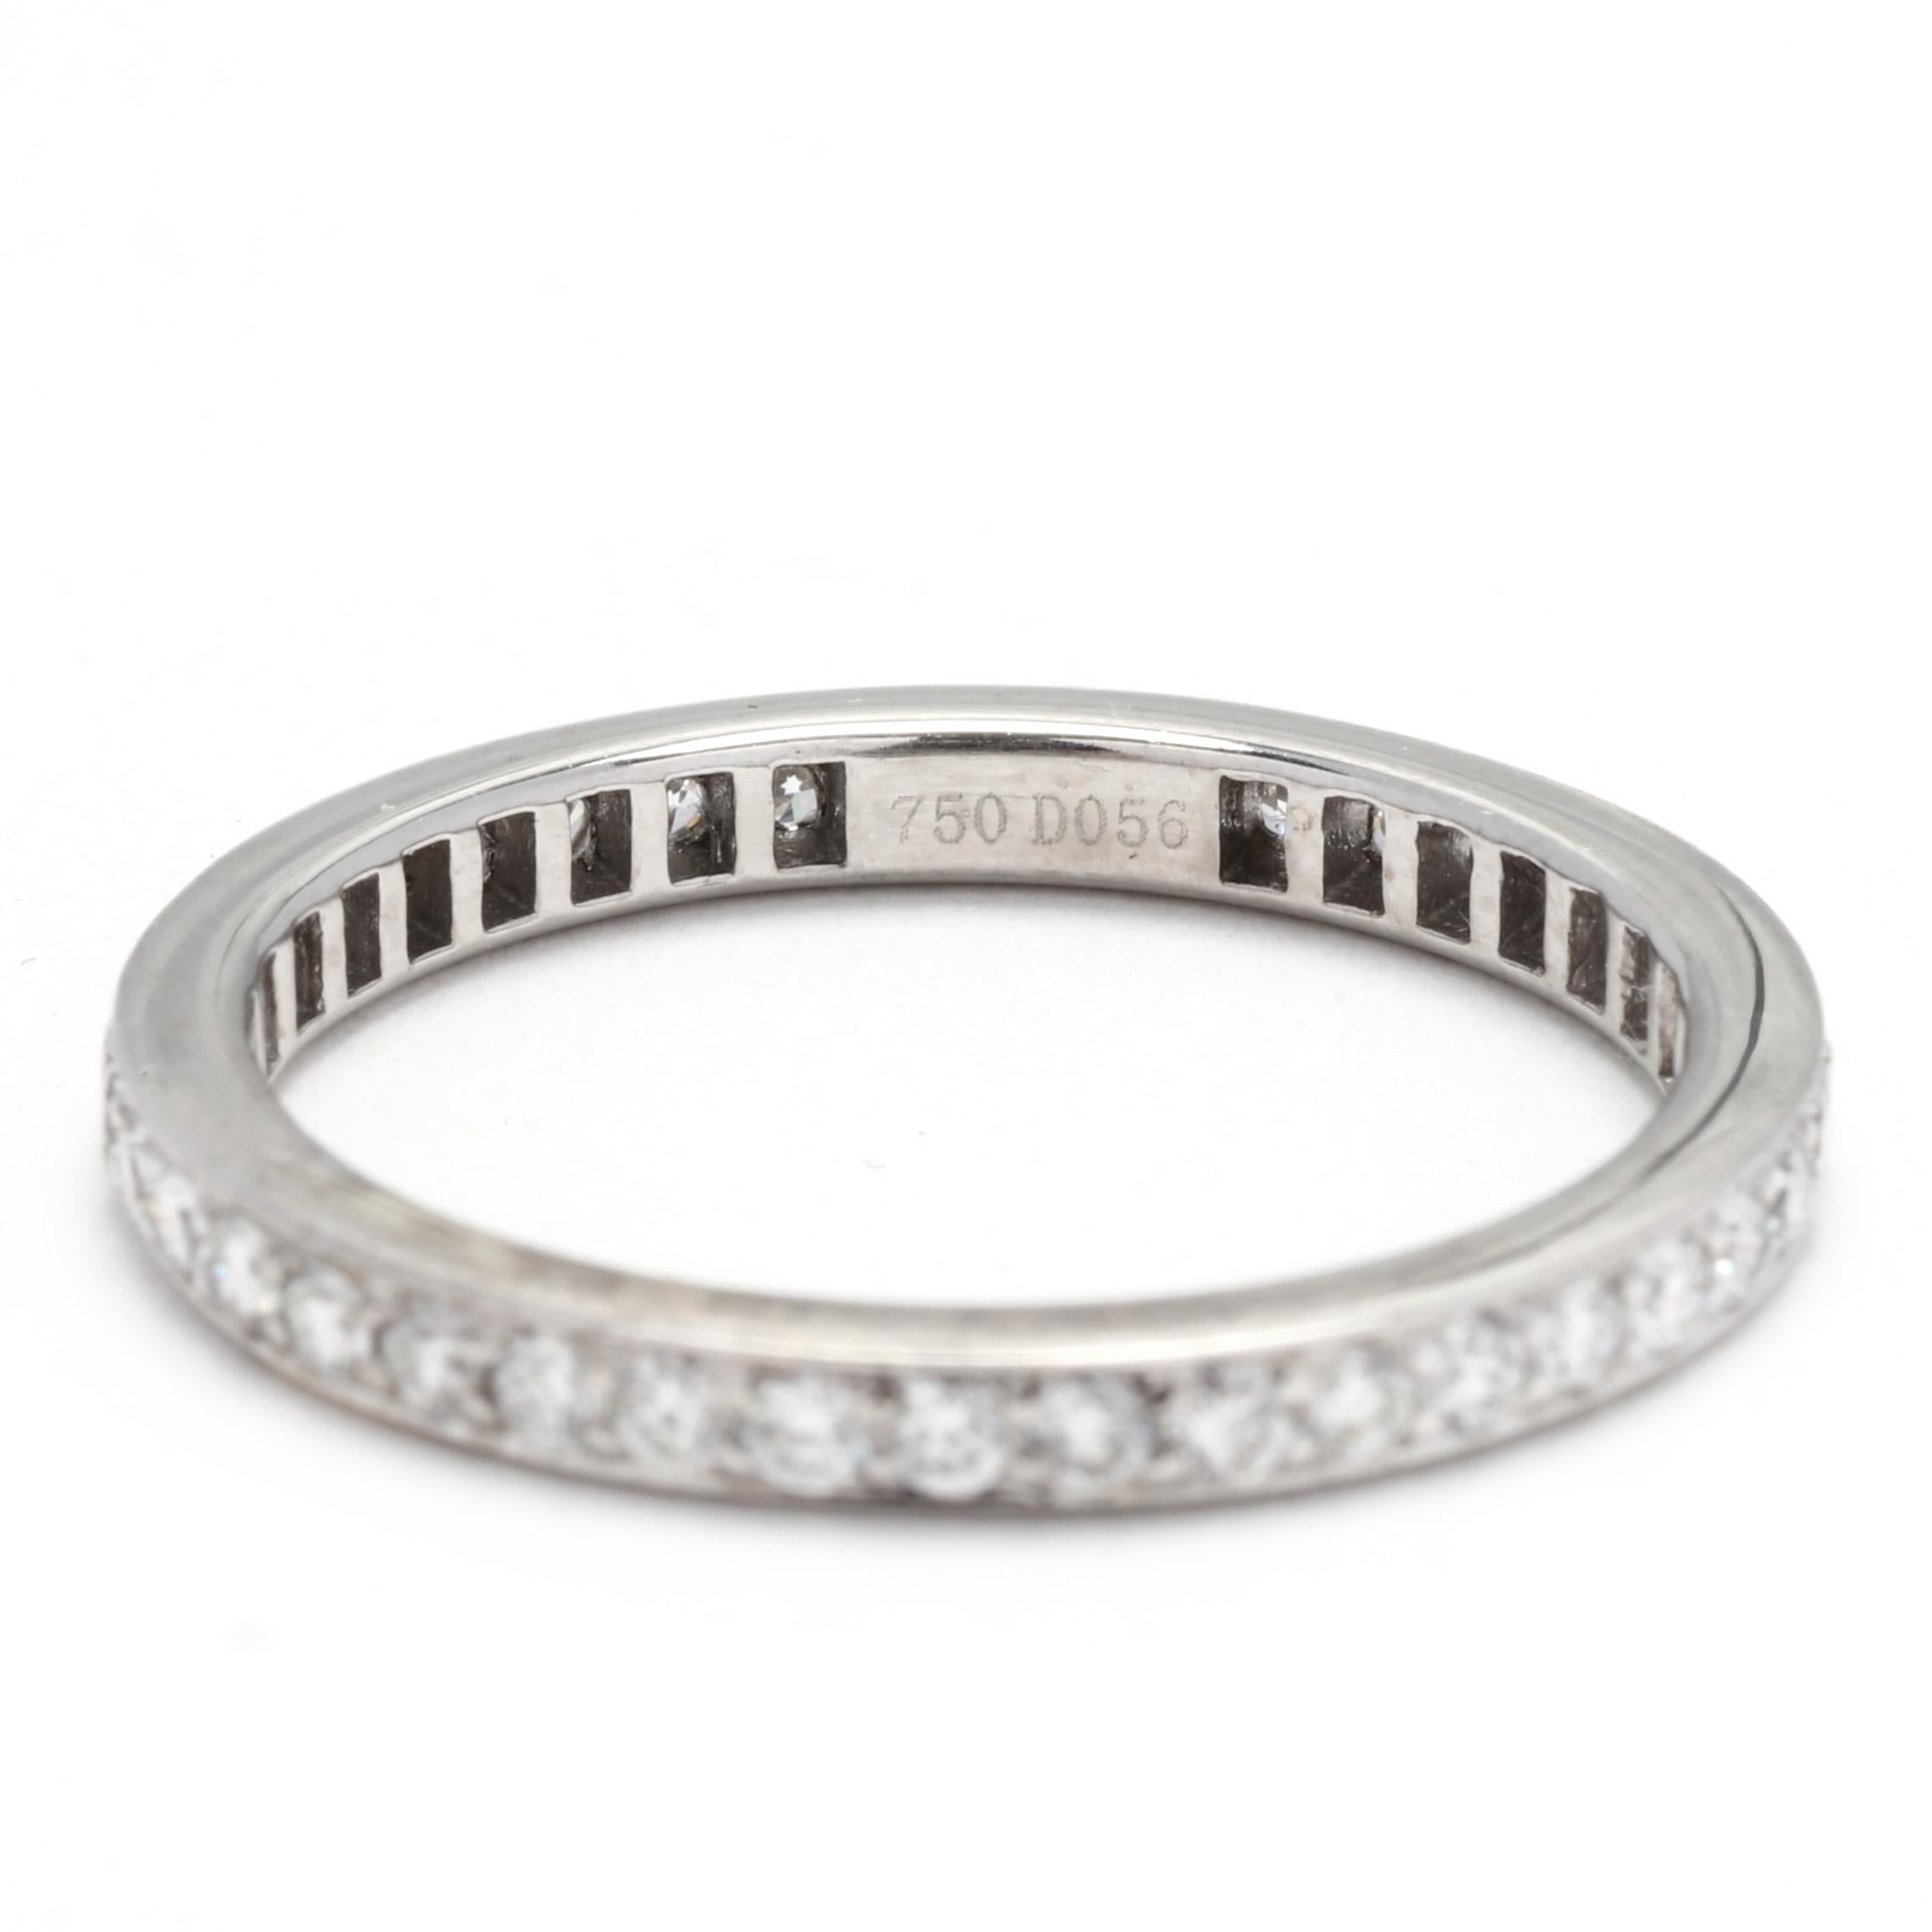 Brilliant Cut 0.56ctw Thin Diamond Eternity Wedding Band, 18KT White Gold, Ring Size 6.5 For Sale